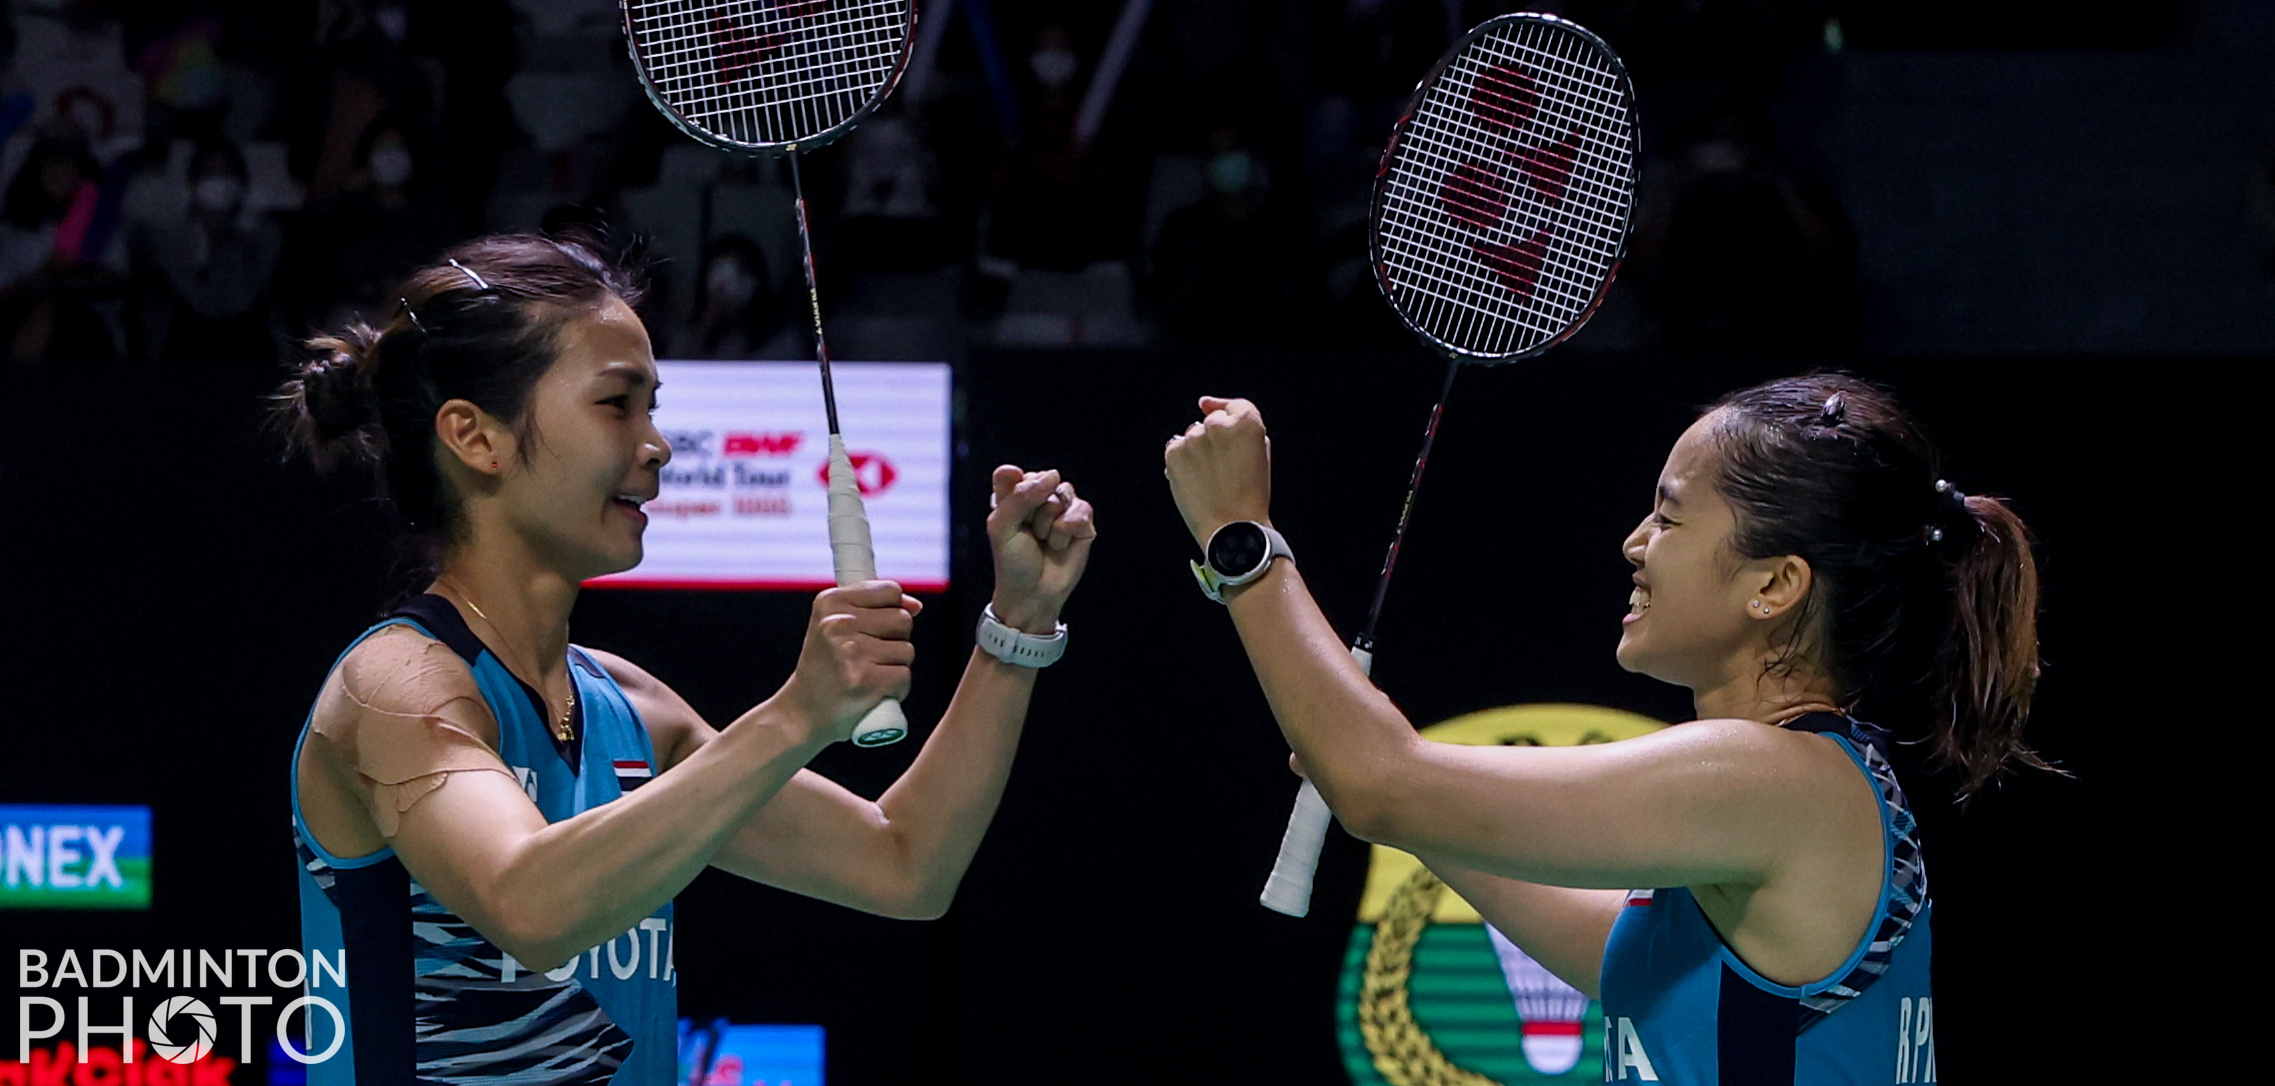 The big surprise in the women’s doubles occurred in the match which brought together two-time World Champions Chen Qingchen / Jia Yifan against Thailand’s Jongkolphan Kititharakul / Rawinda Prajongjai. Story: […]